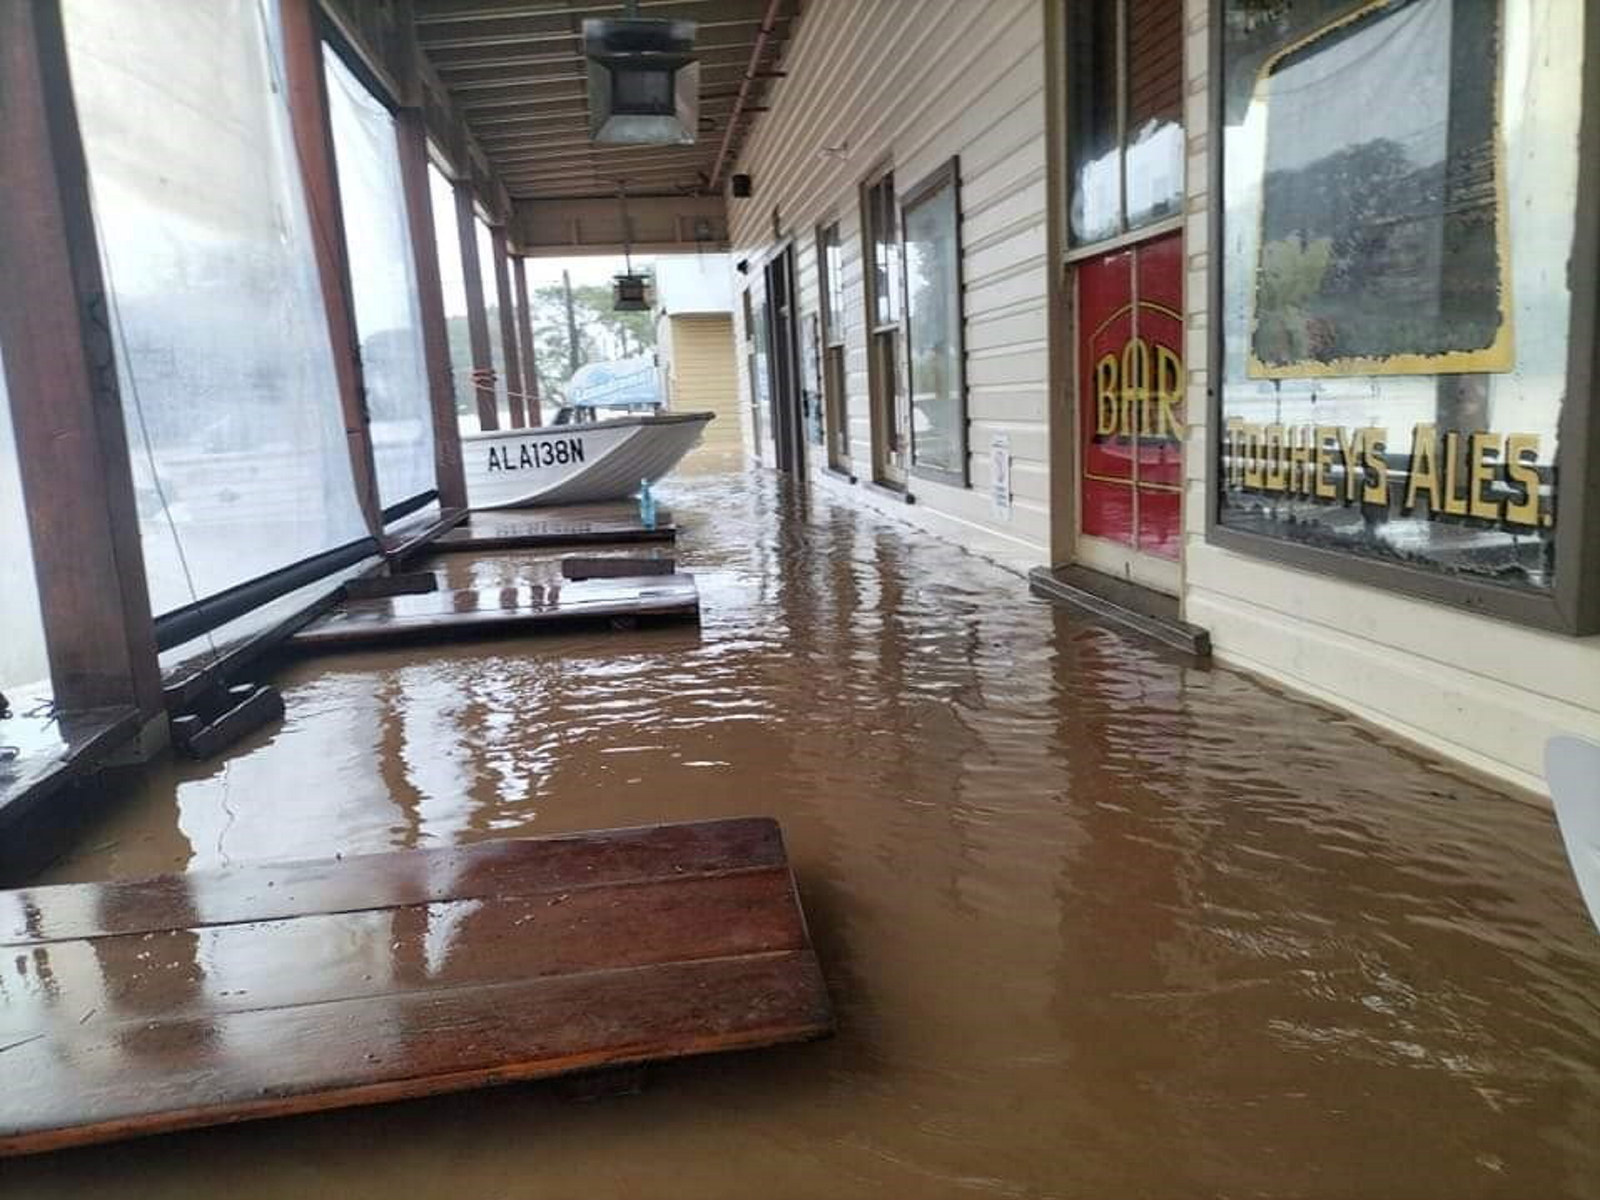 External damage caused by the NSW floods in 2022 in the north Byron area (submission 0900)